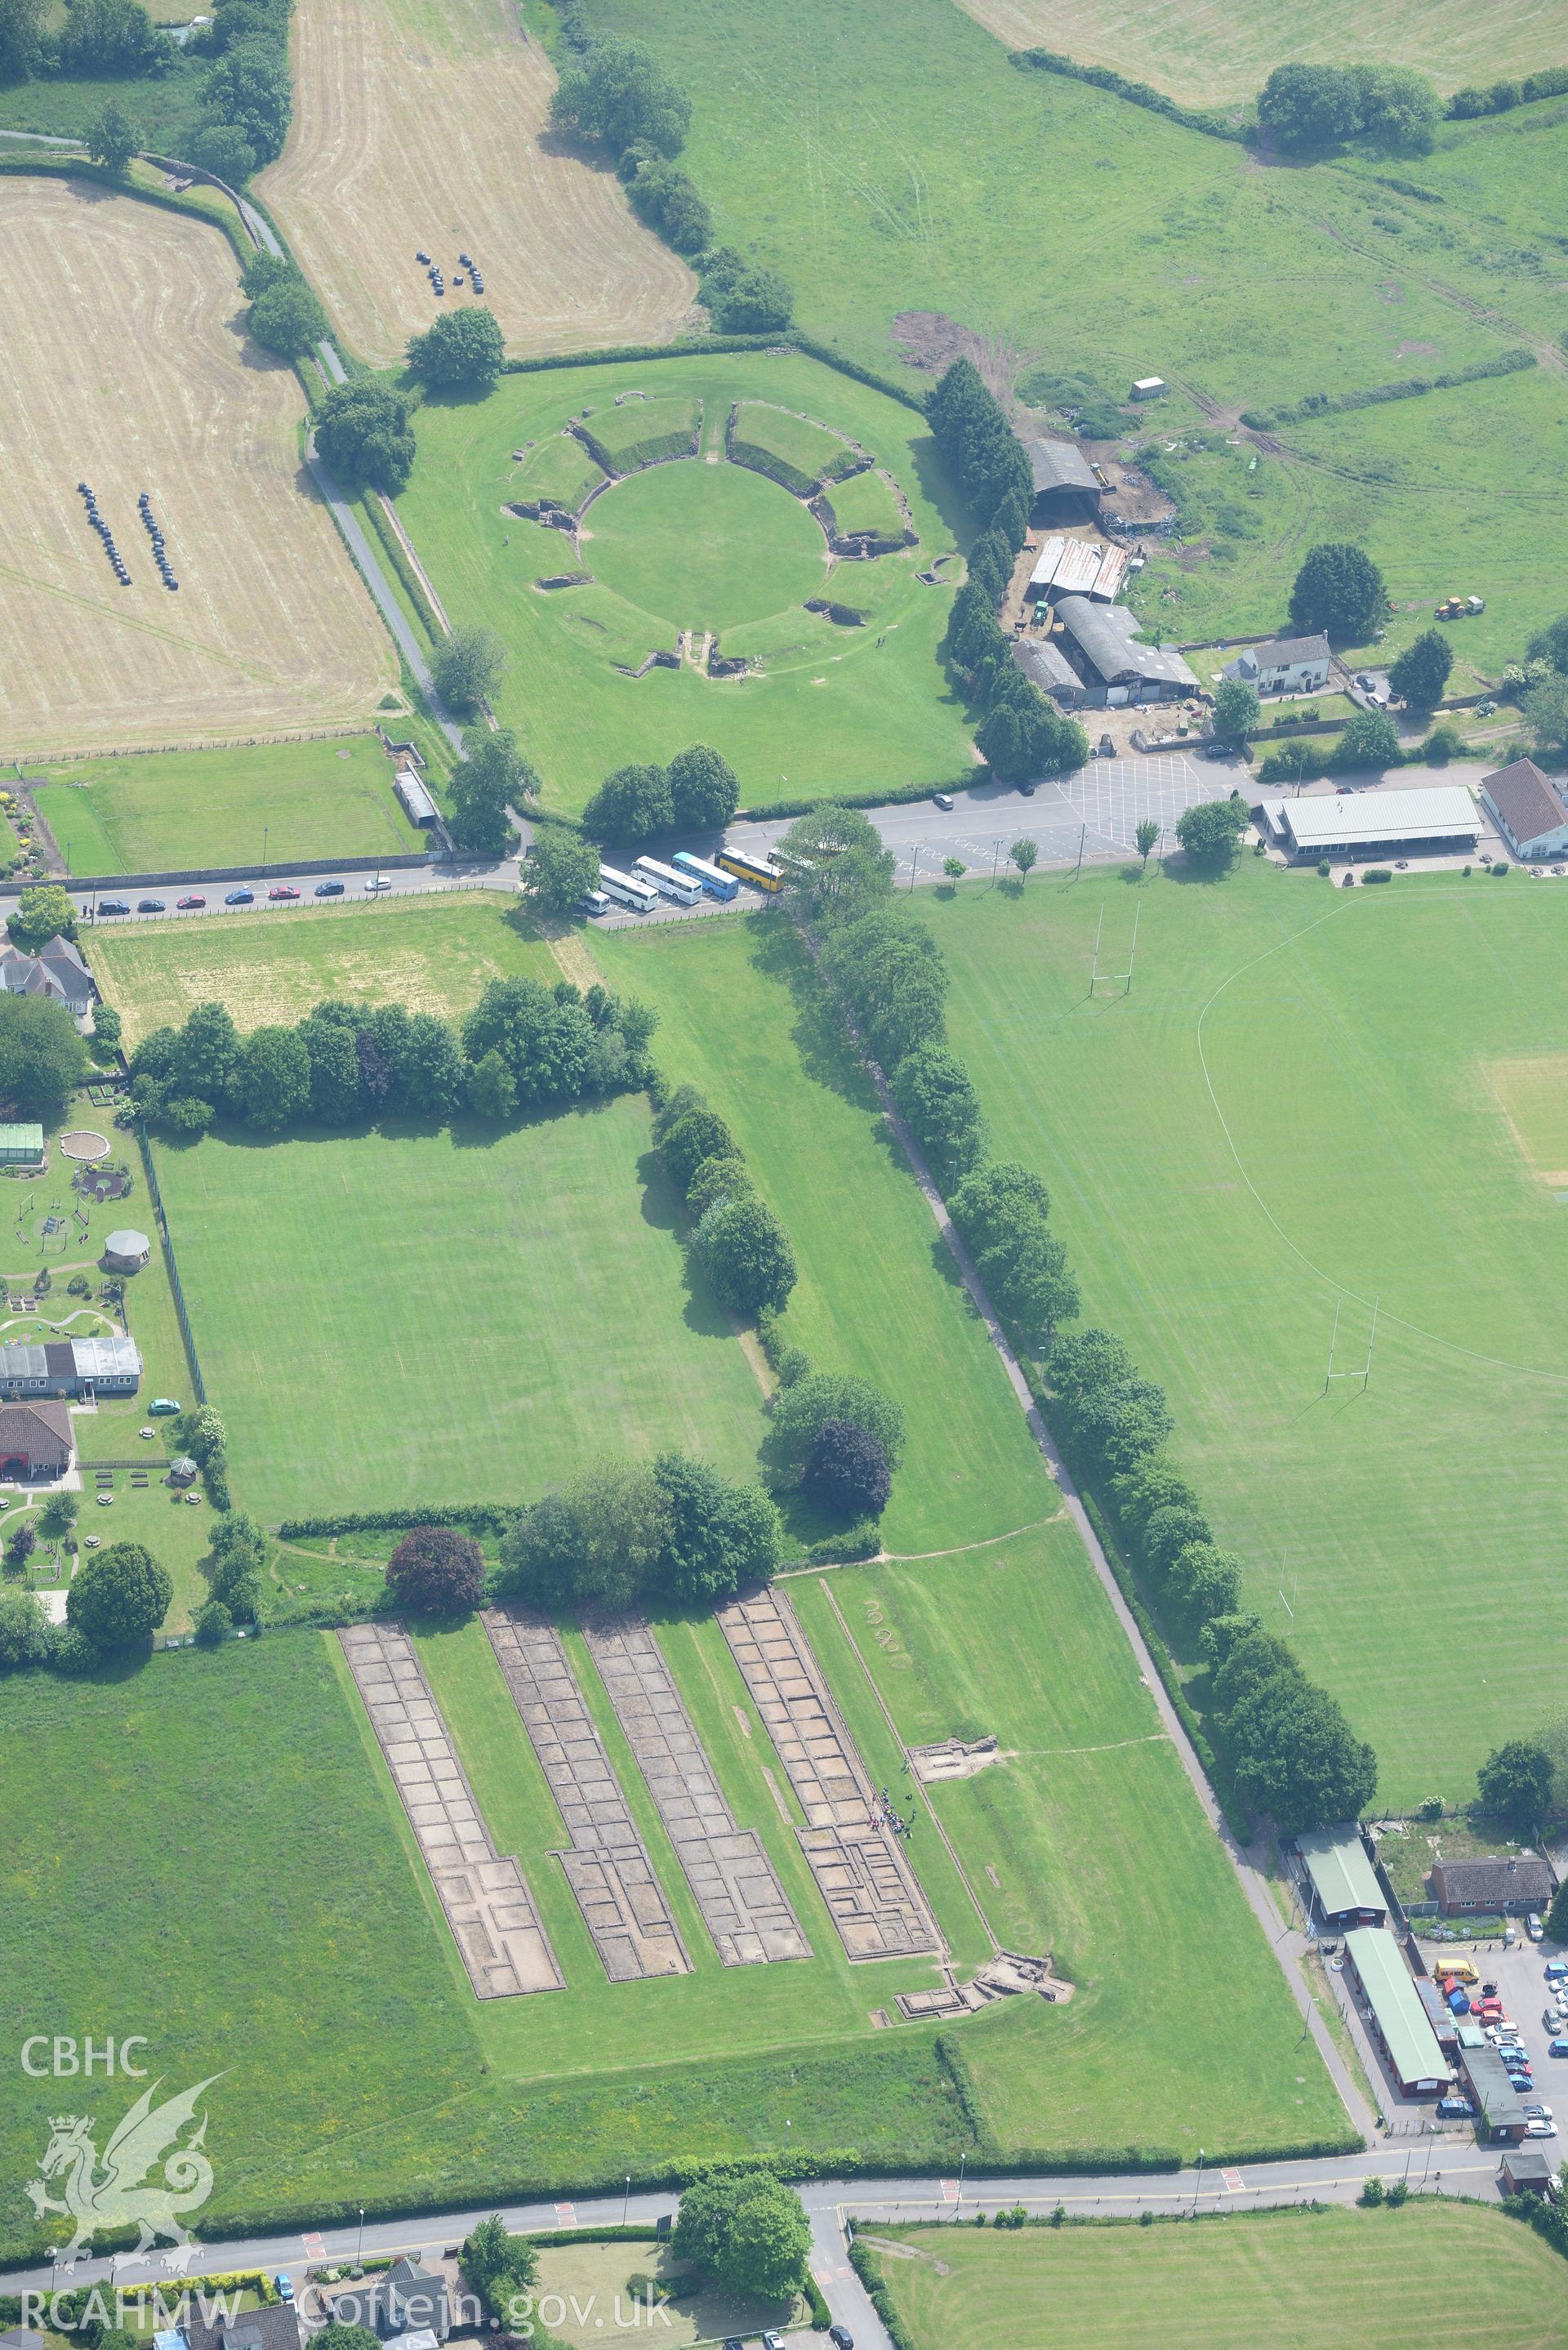 Caerleon town including views of the Roman barracks and amphitheatre. Oblique aerial photograph taken during the Royal Commission's programme of archaeological aerial reconnaissance by Toby Driver on 11th June 2015.